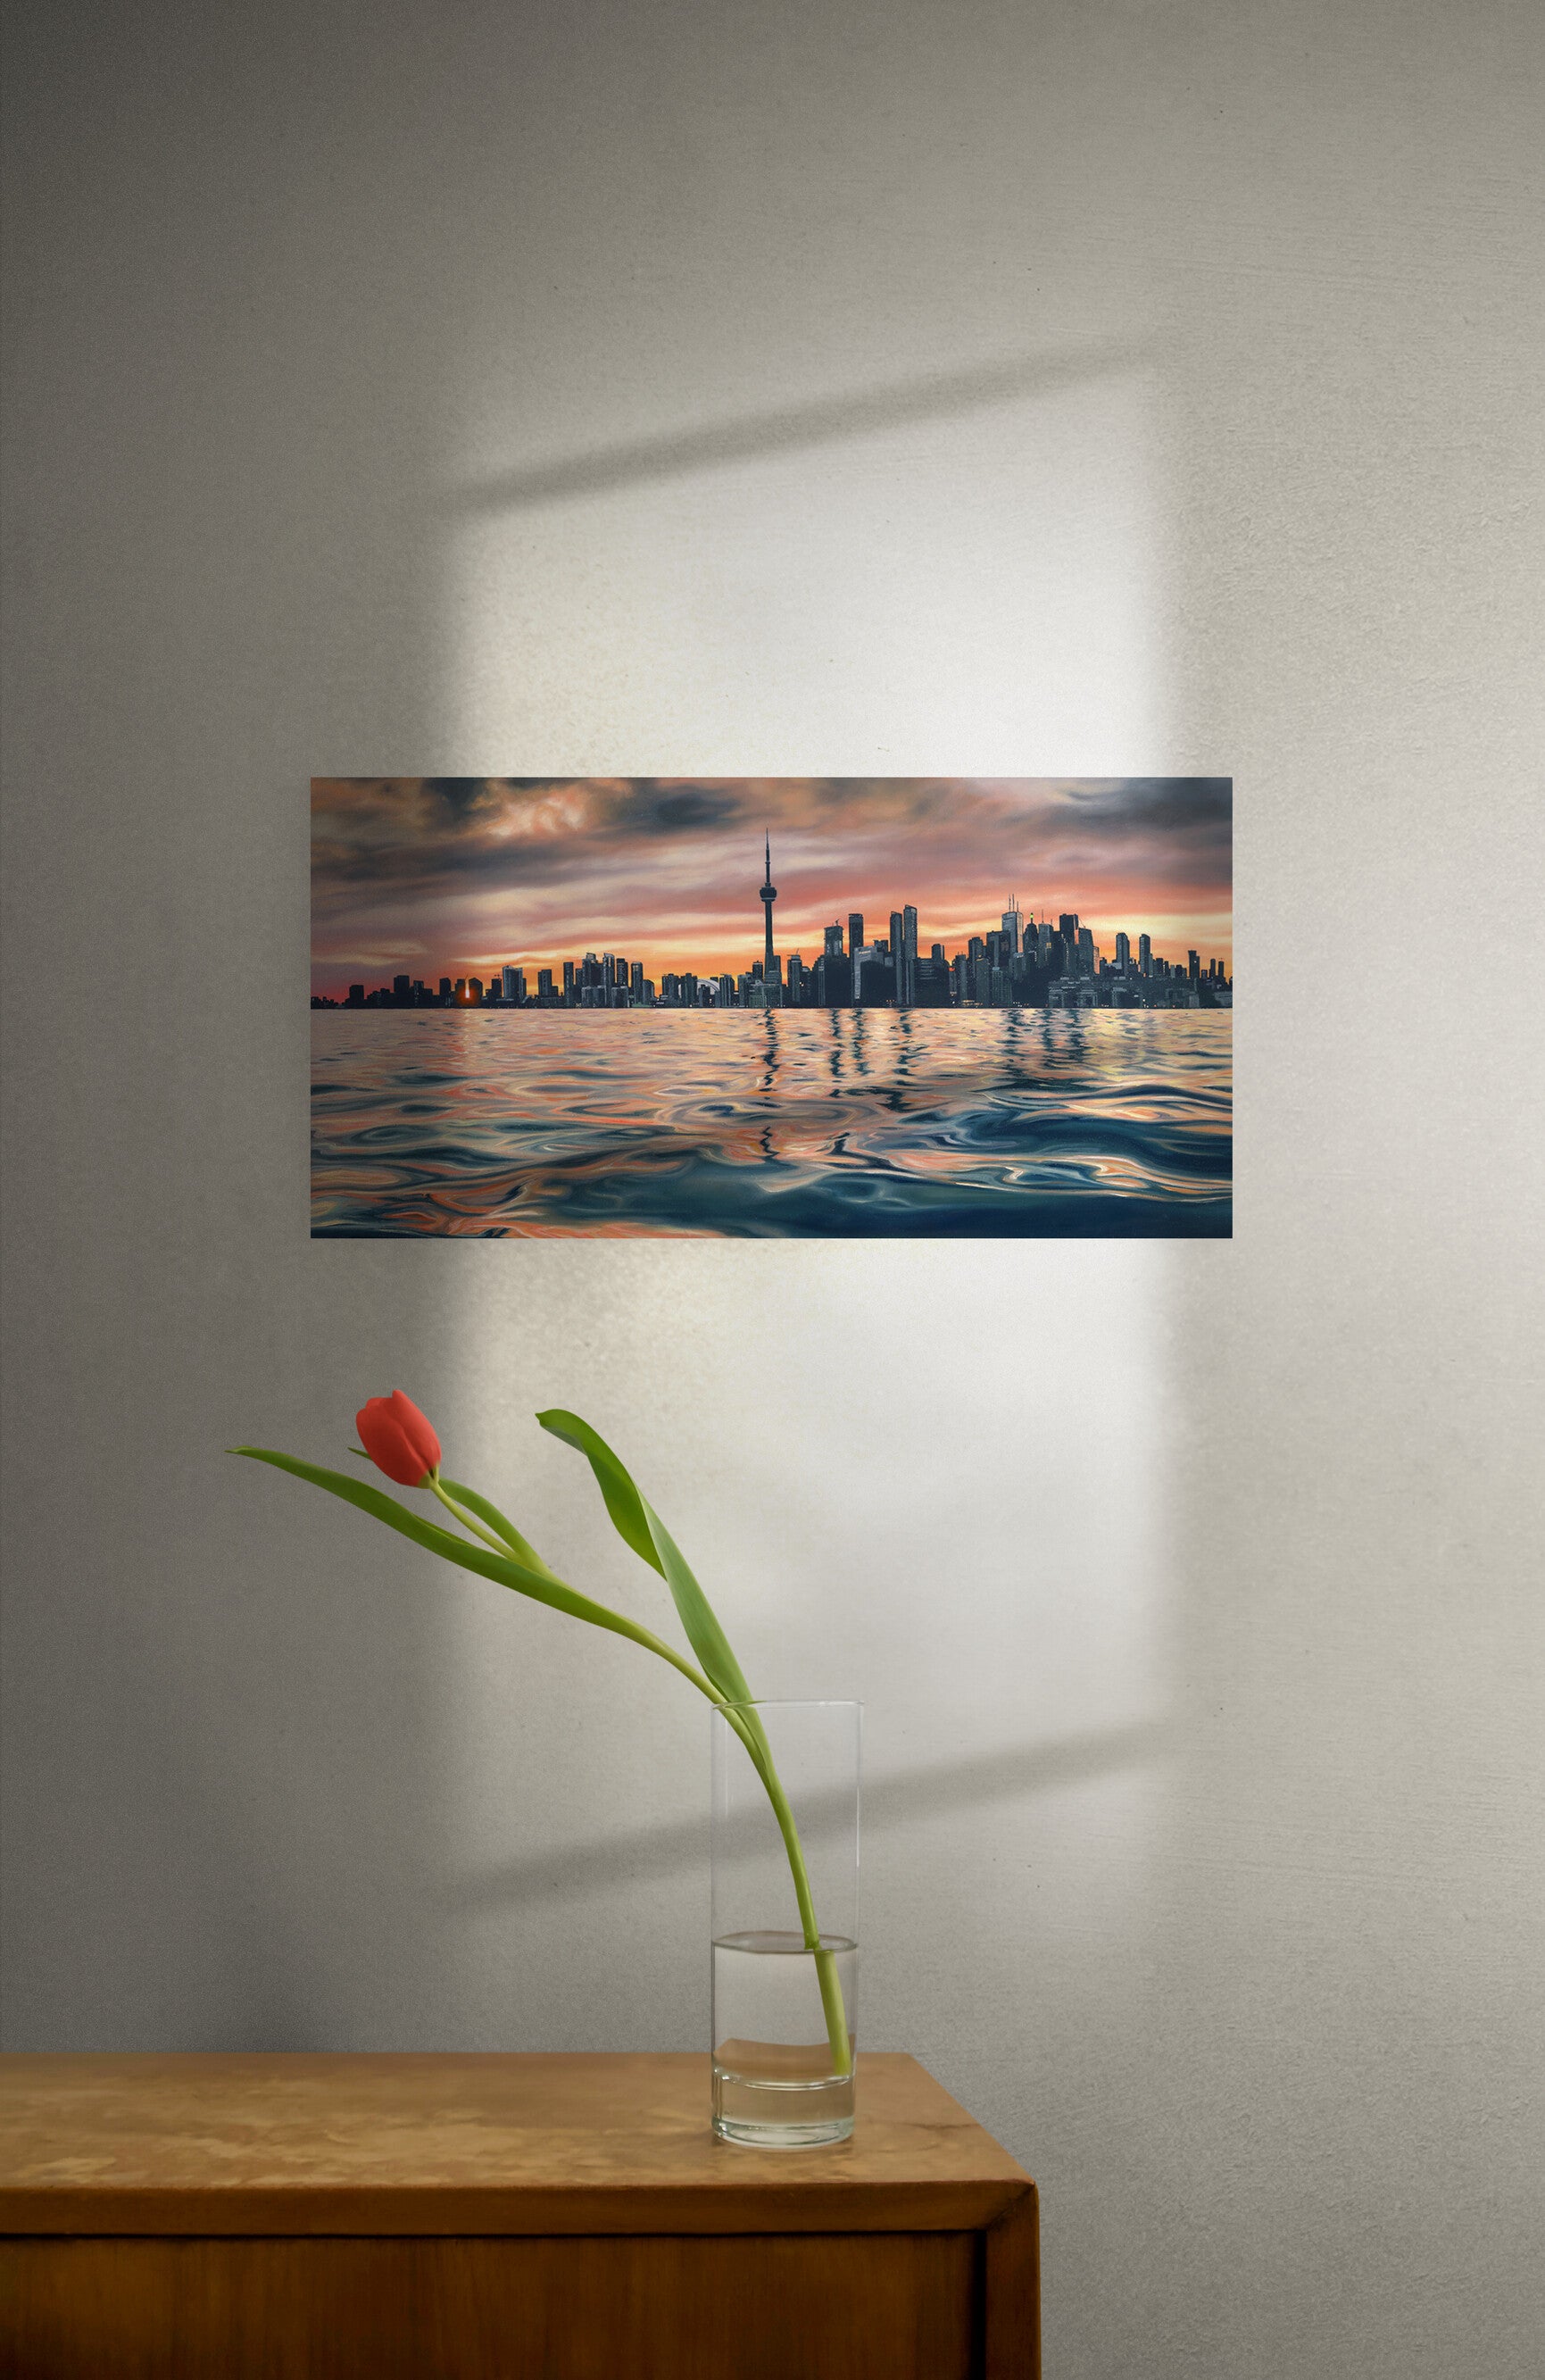 The original painting “Sundown In The 6ix" by Hannah Kilby from Hannah Michelle Studios, displayed as a fine art print.